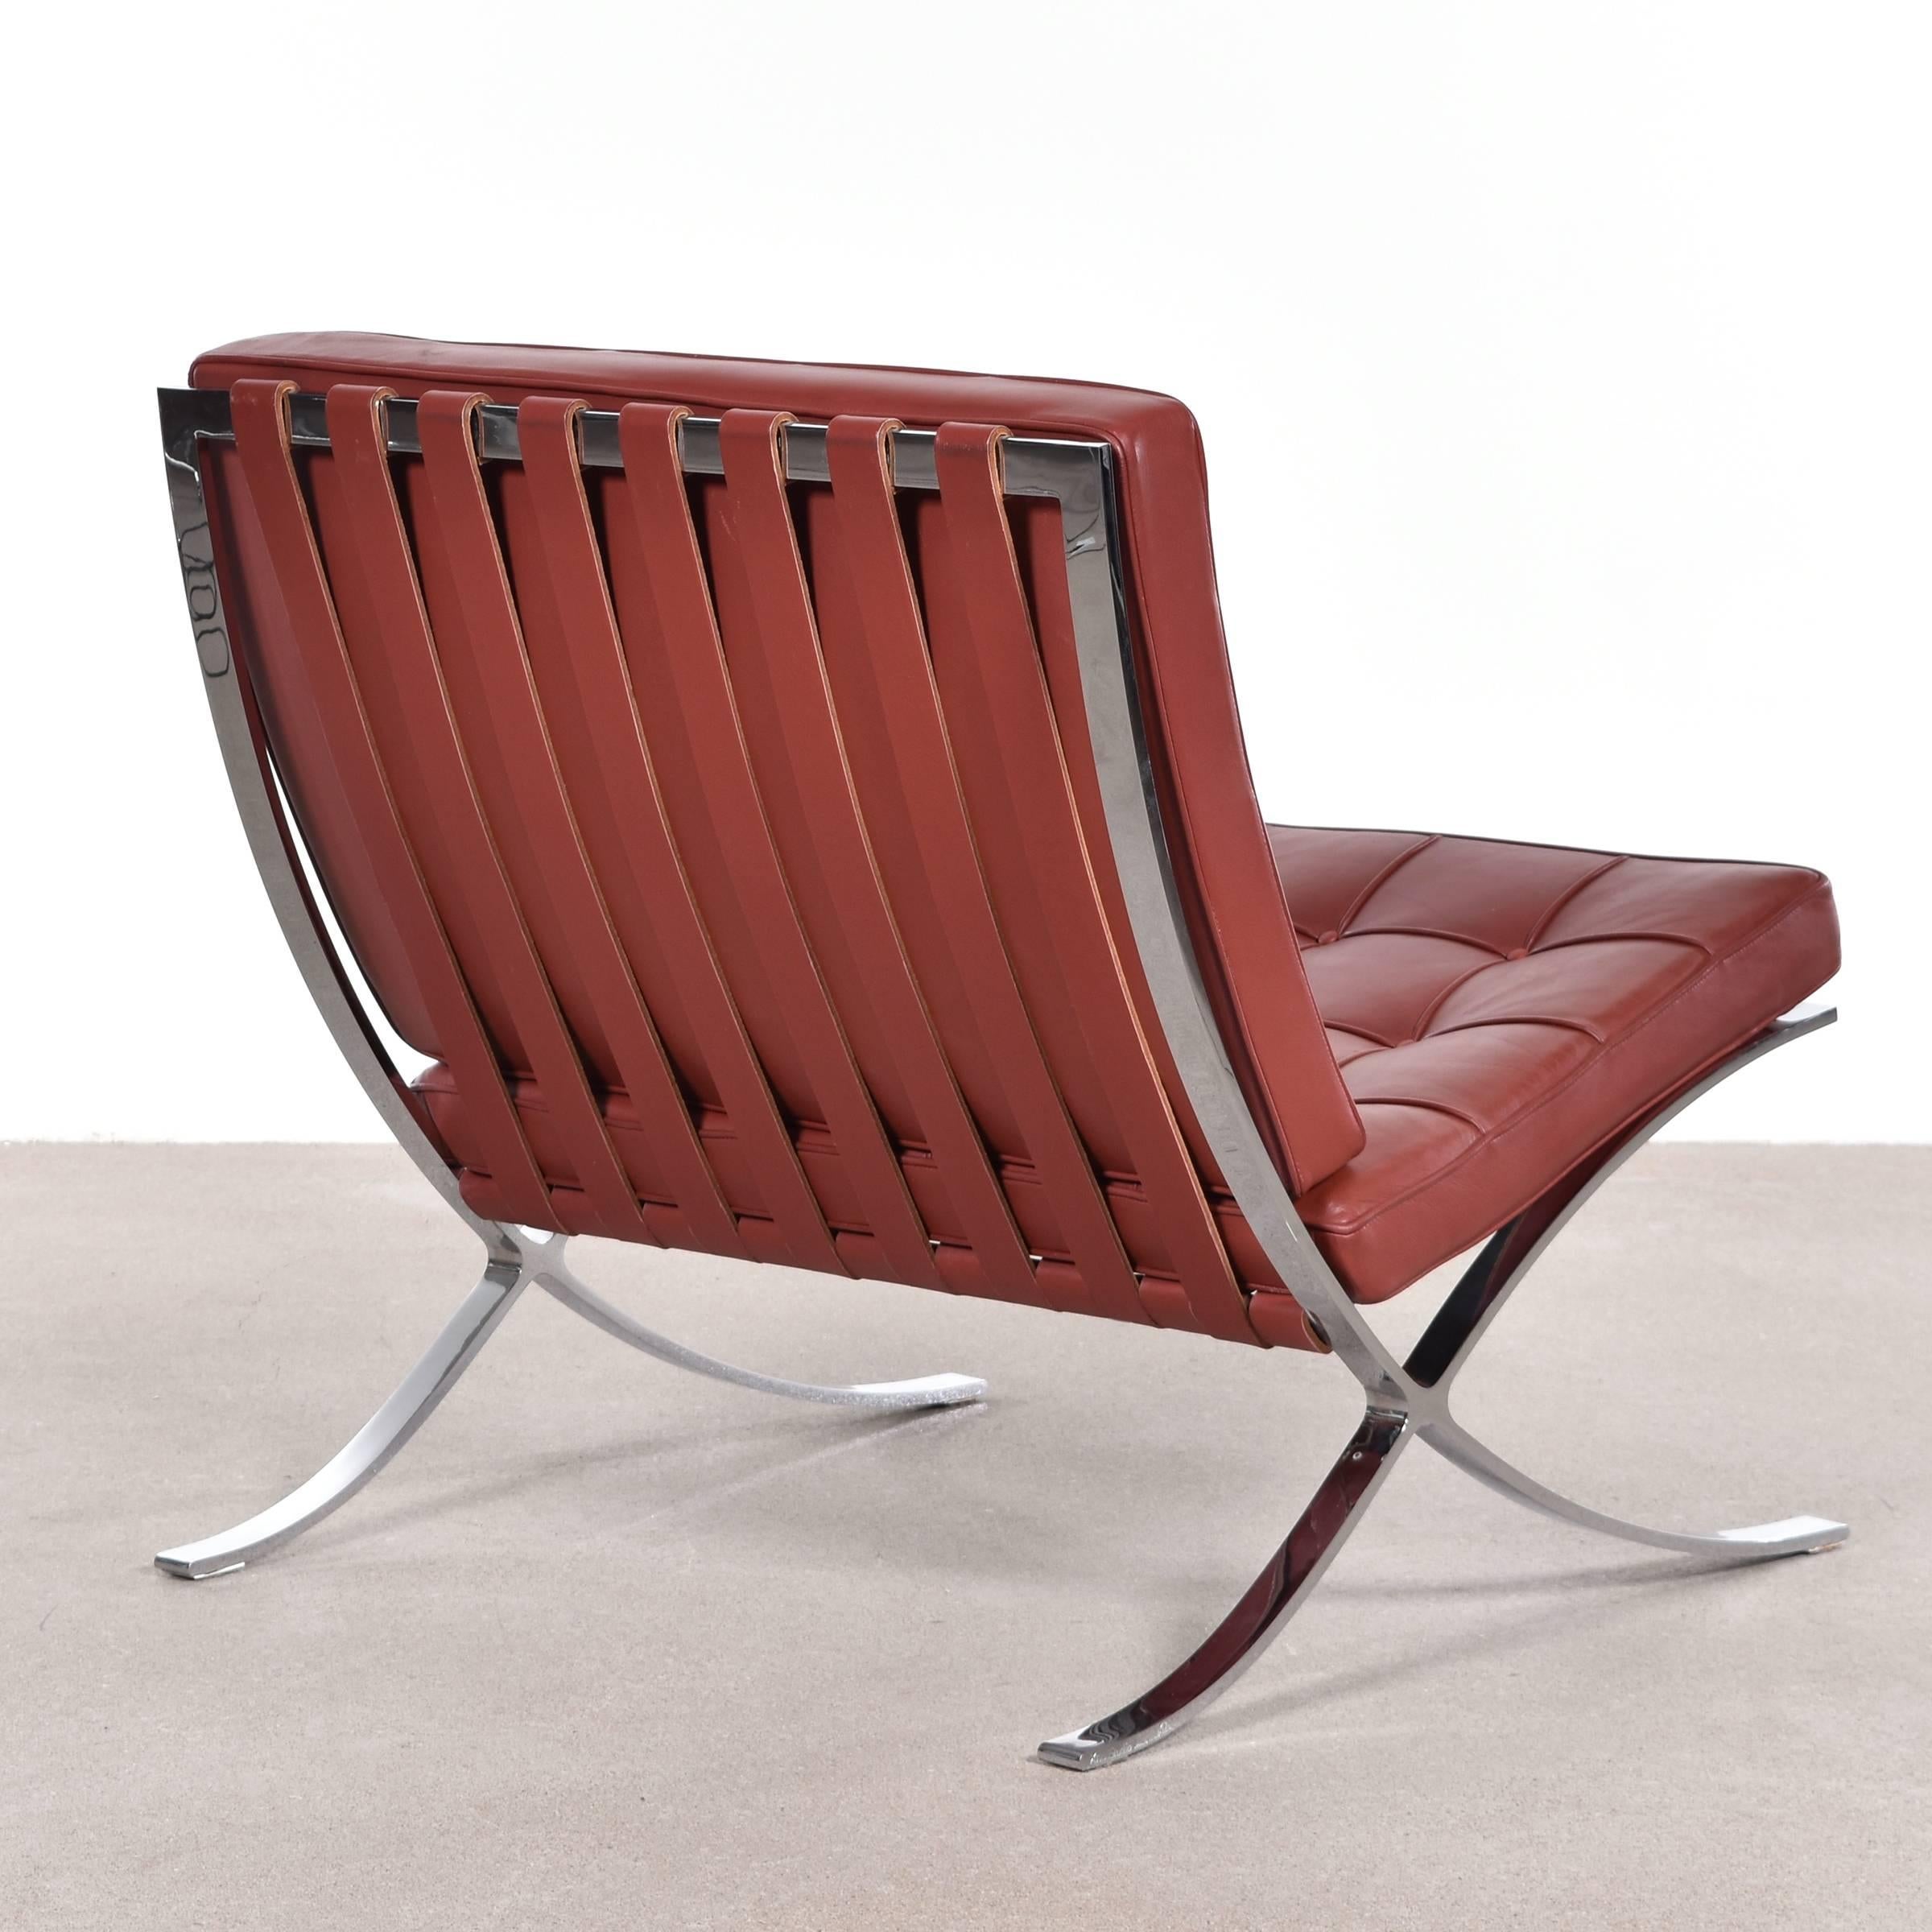 Mid-Century Modern Set of Four Barcelona Chairs by Ludwig Mies van der Rohe for Knoll